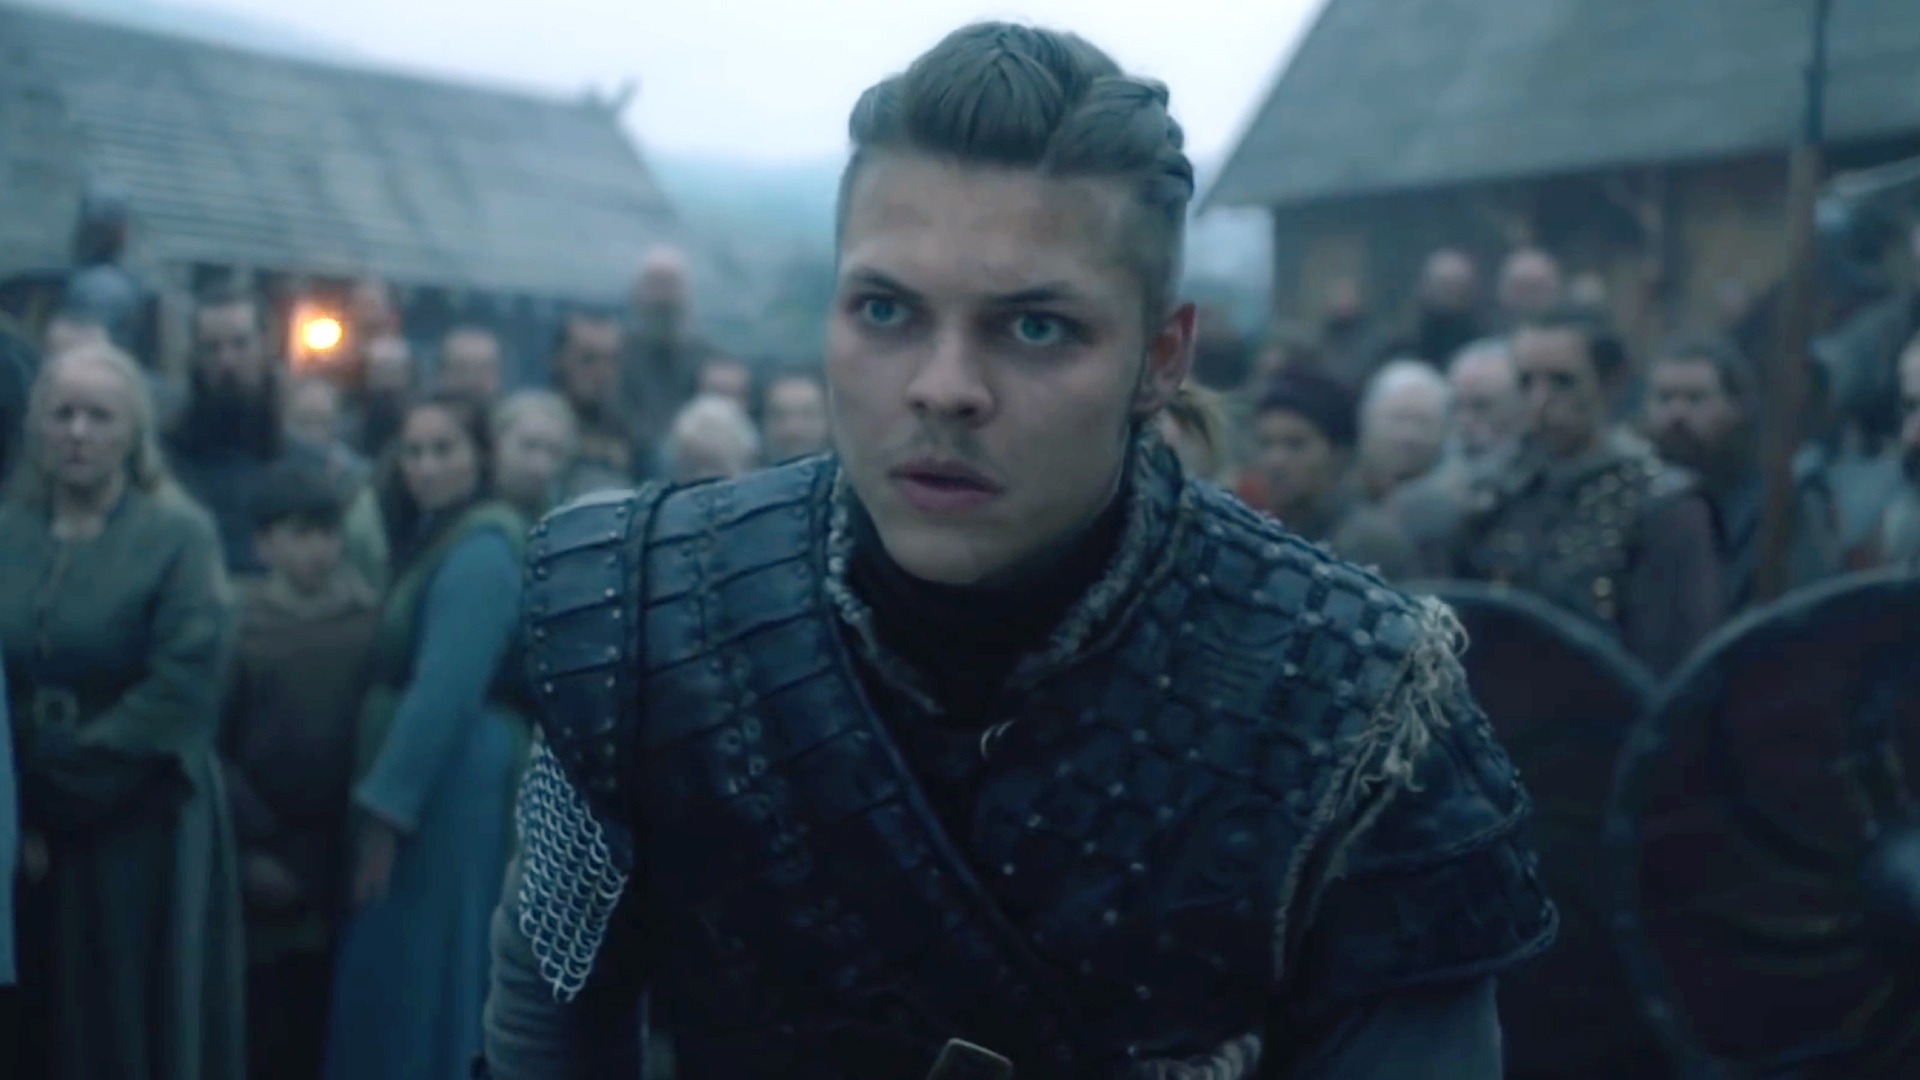 Vikings': Ivar the Boneless Gets Crowned in Chilling New Season 5B Poster  (Exclusive)